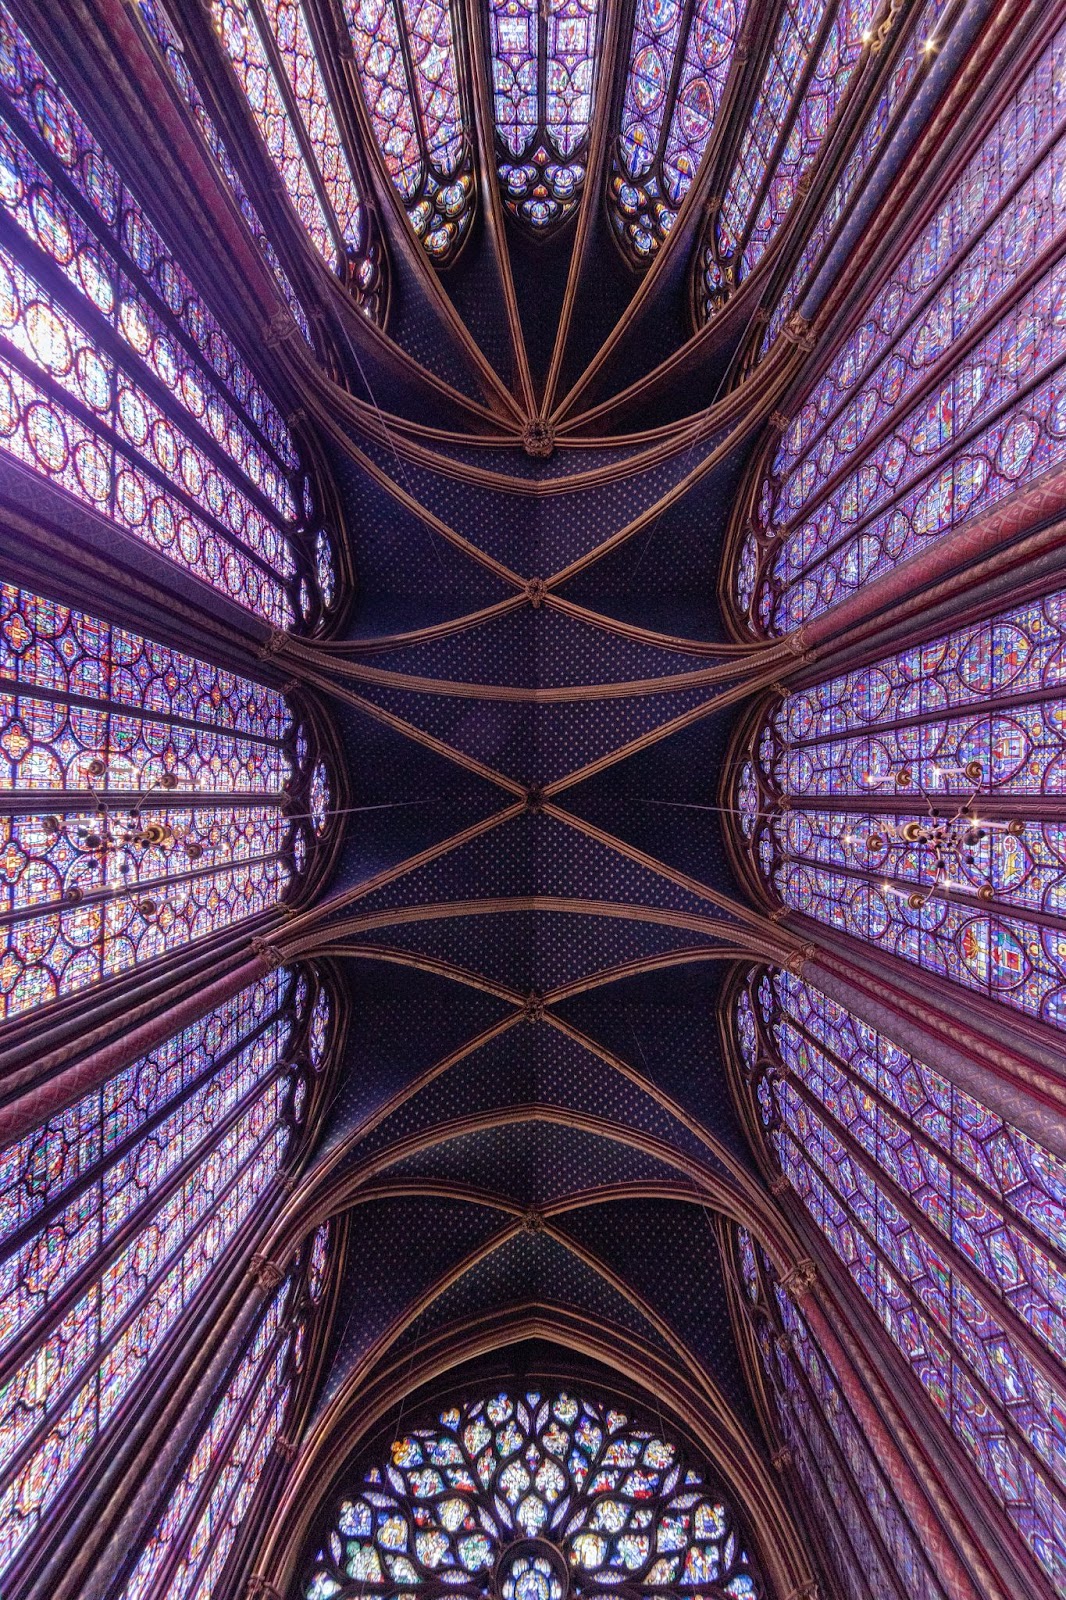 Stained glass windows from Saint Chapelle in Paris, France